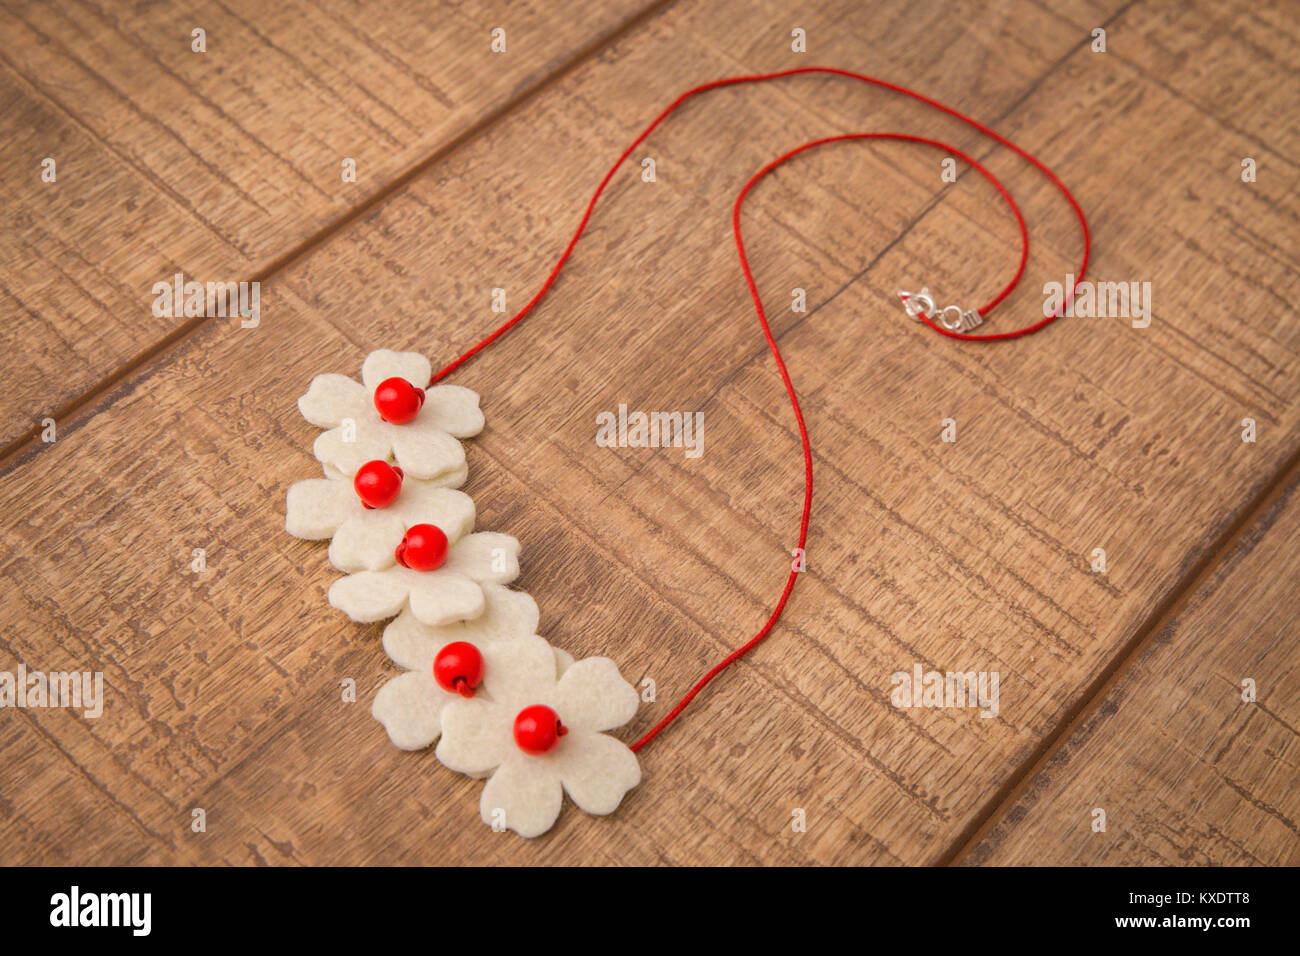 Colorful wood and wool felt flower shaped beads necklace hand painted with red and white color beads on a wood table background Stock Photo